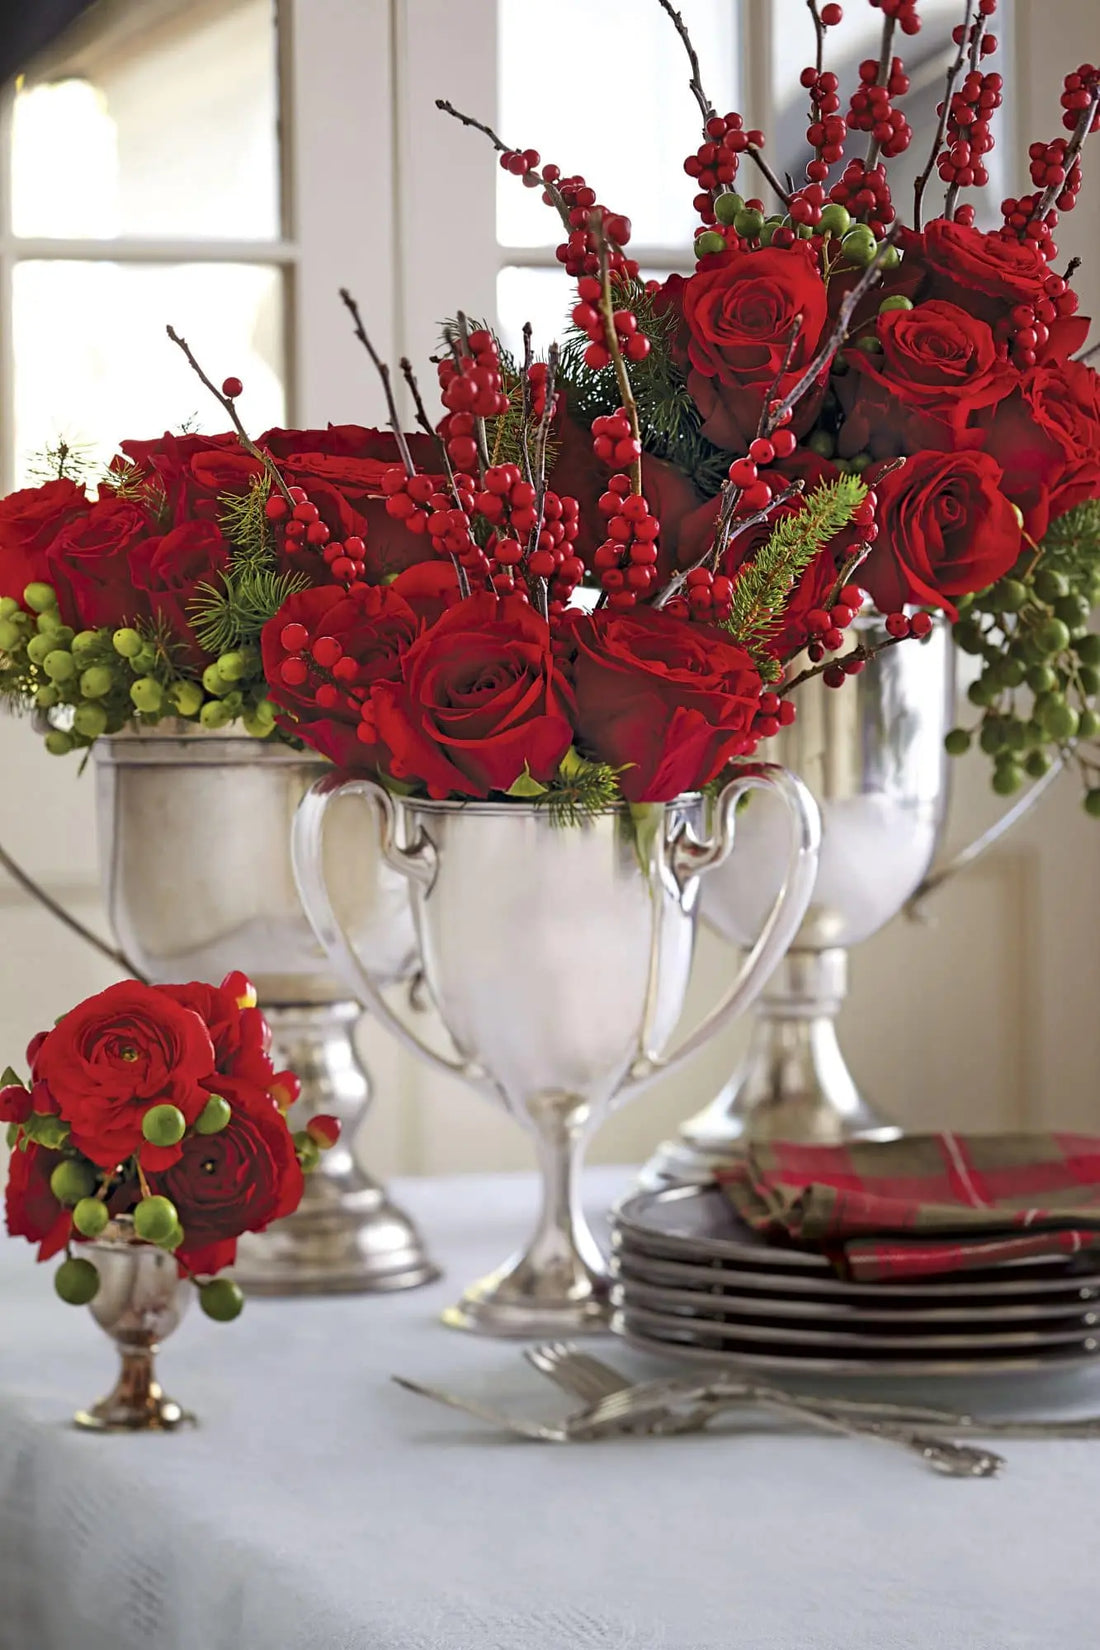 How to Make Christmas Flower Arrangements?